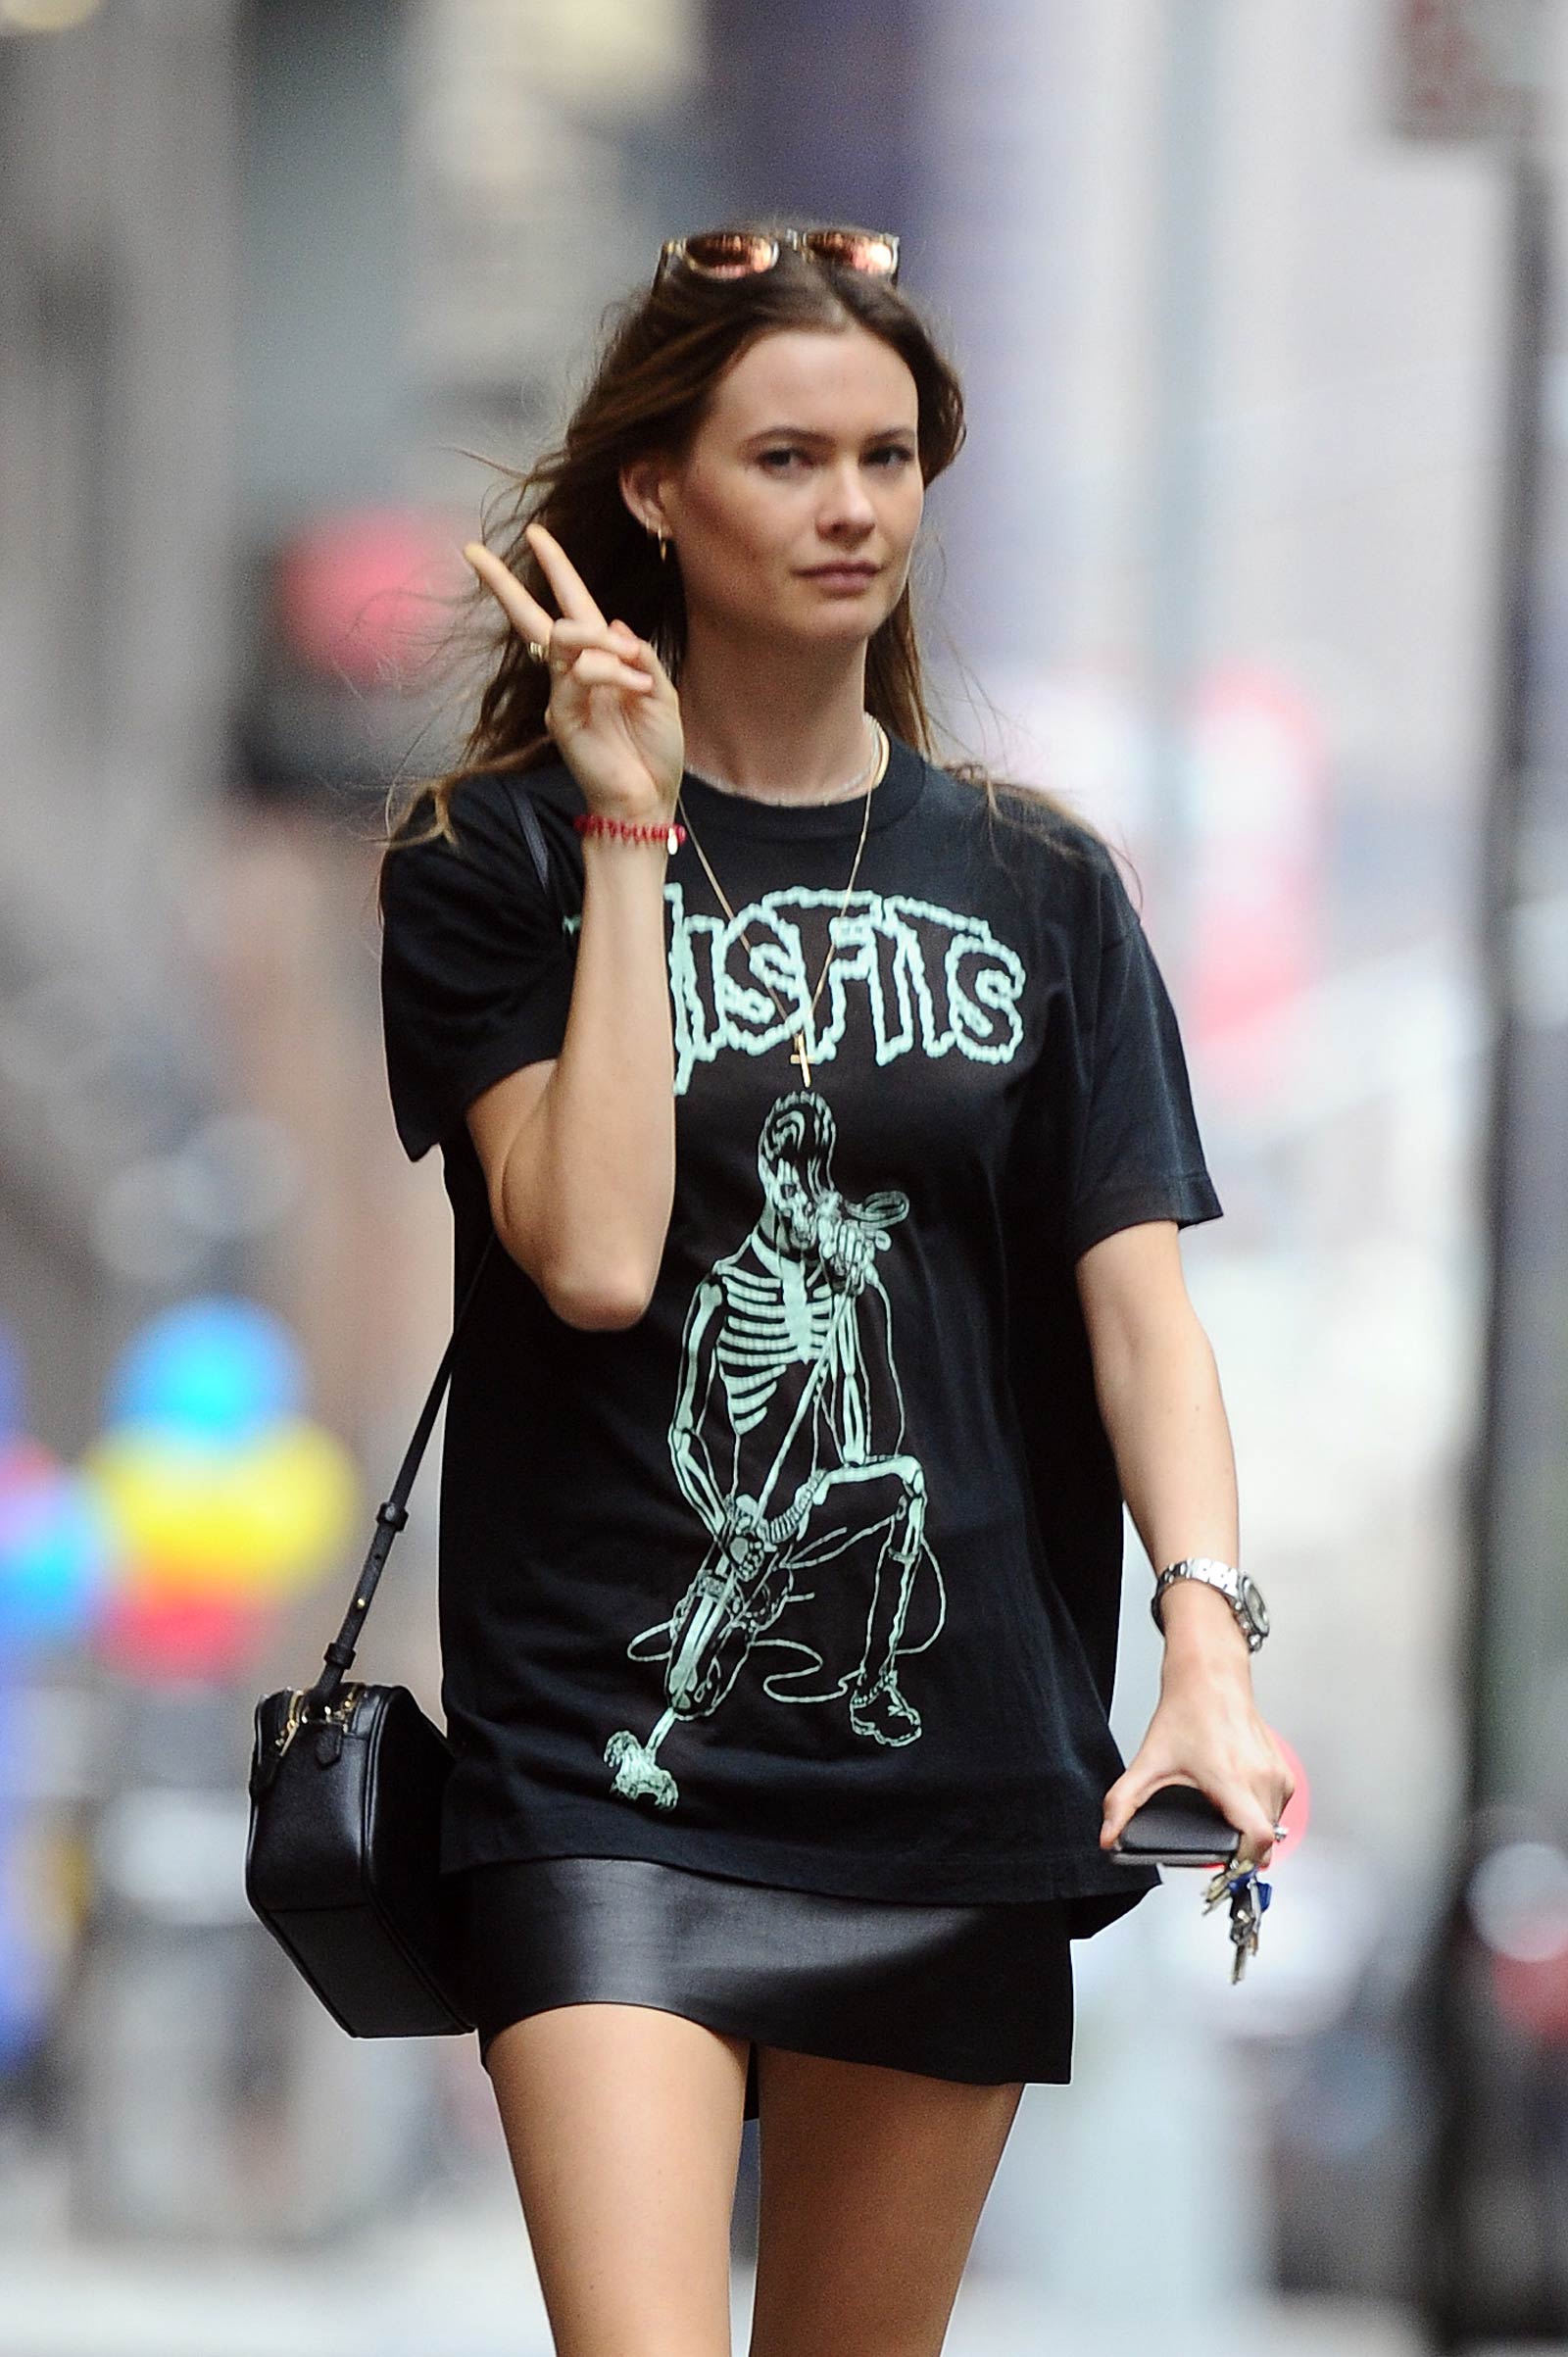 Behati Prinsloo out in New York City